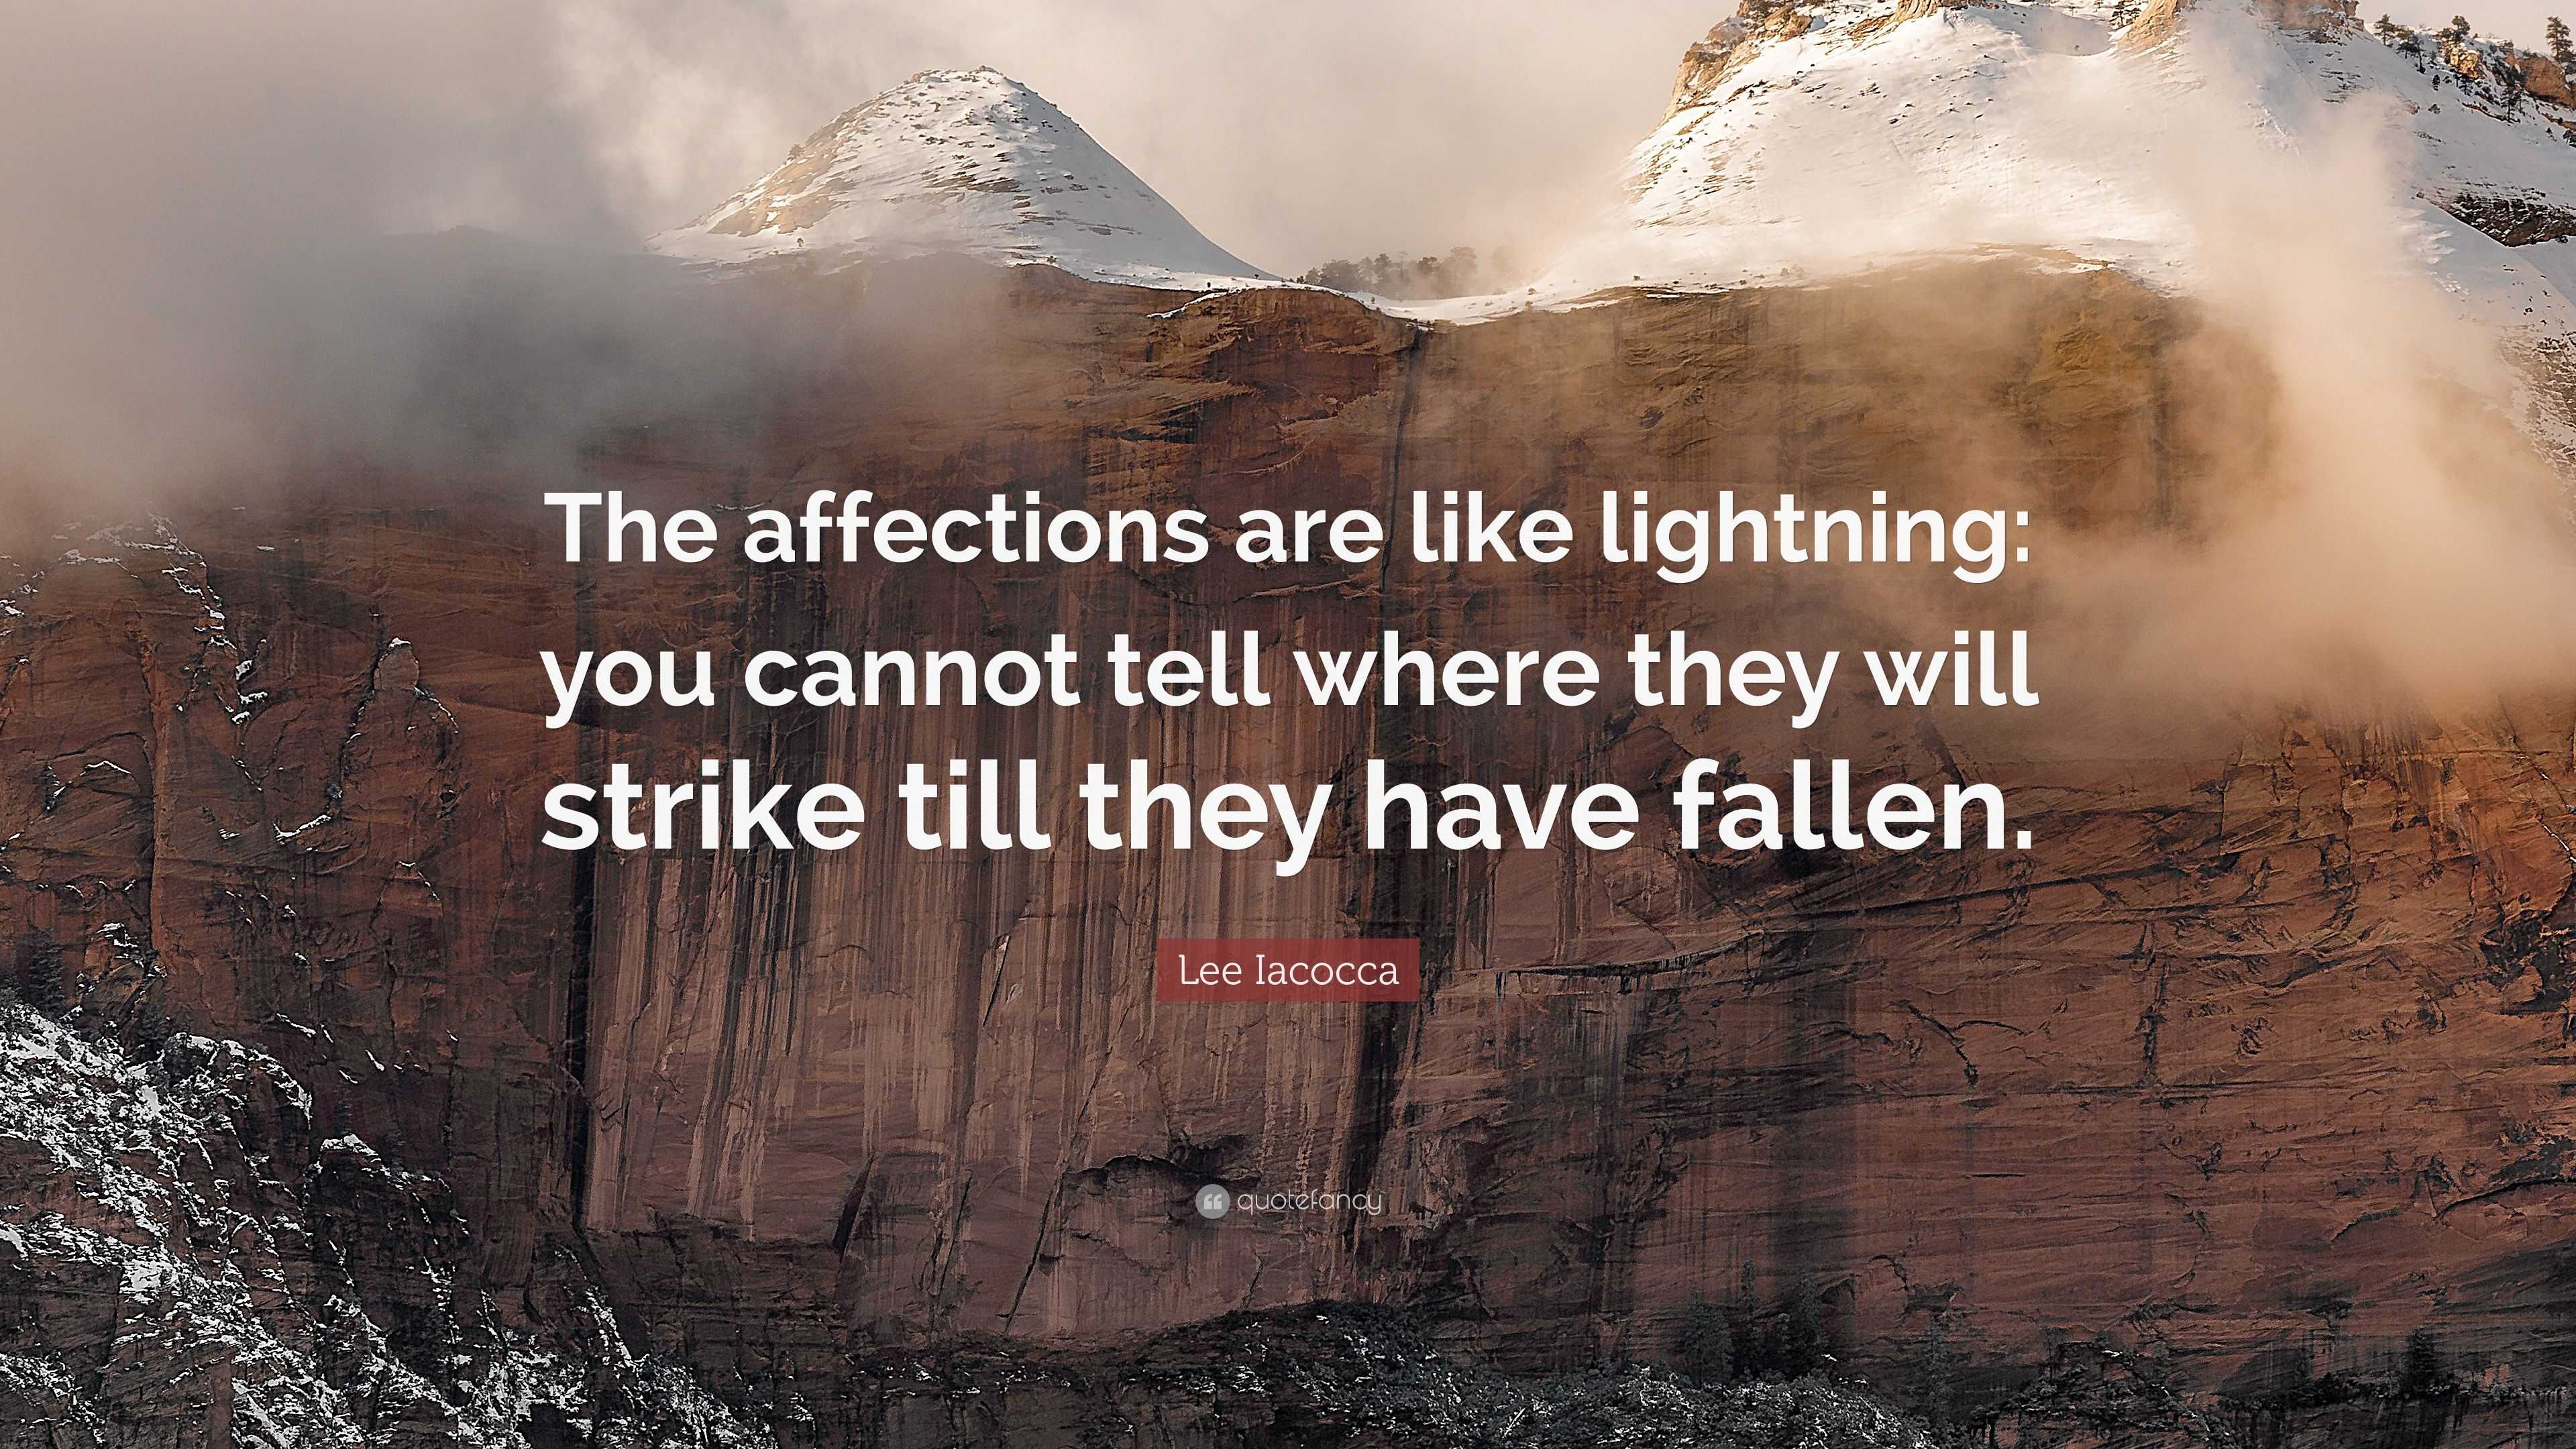 Lee Iacocca Quote: “The affections are like lightning: you cannot tell  where they will strike till